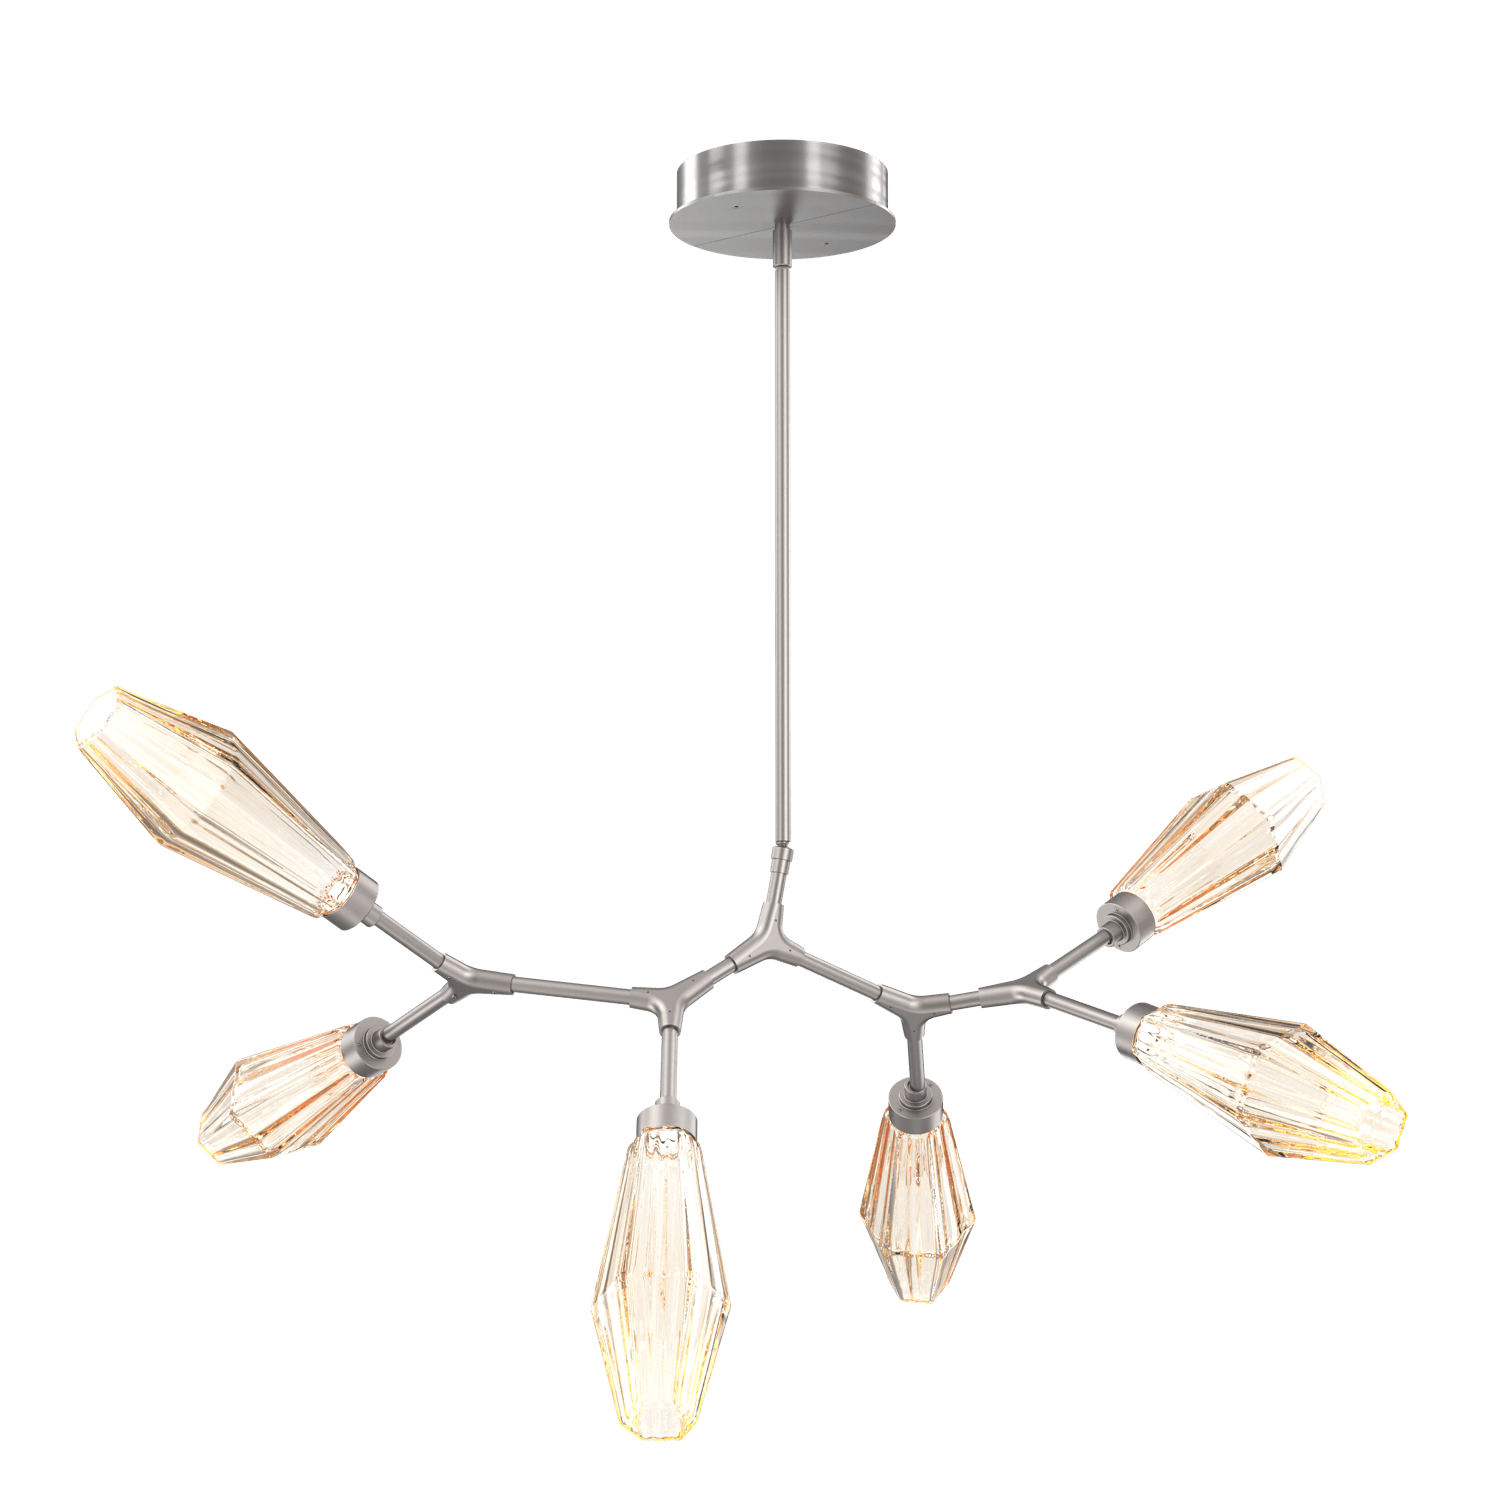 PLB0049-BA-SN-RA-Hammerton-Studio-Aalto-6-light-modern-branch-chandelier-with-satin-nickel-finish-and-optic-ribbed-amber-glass-shades-and-LED-lamping